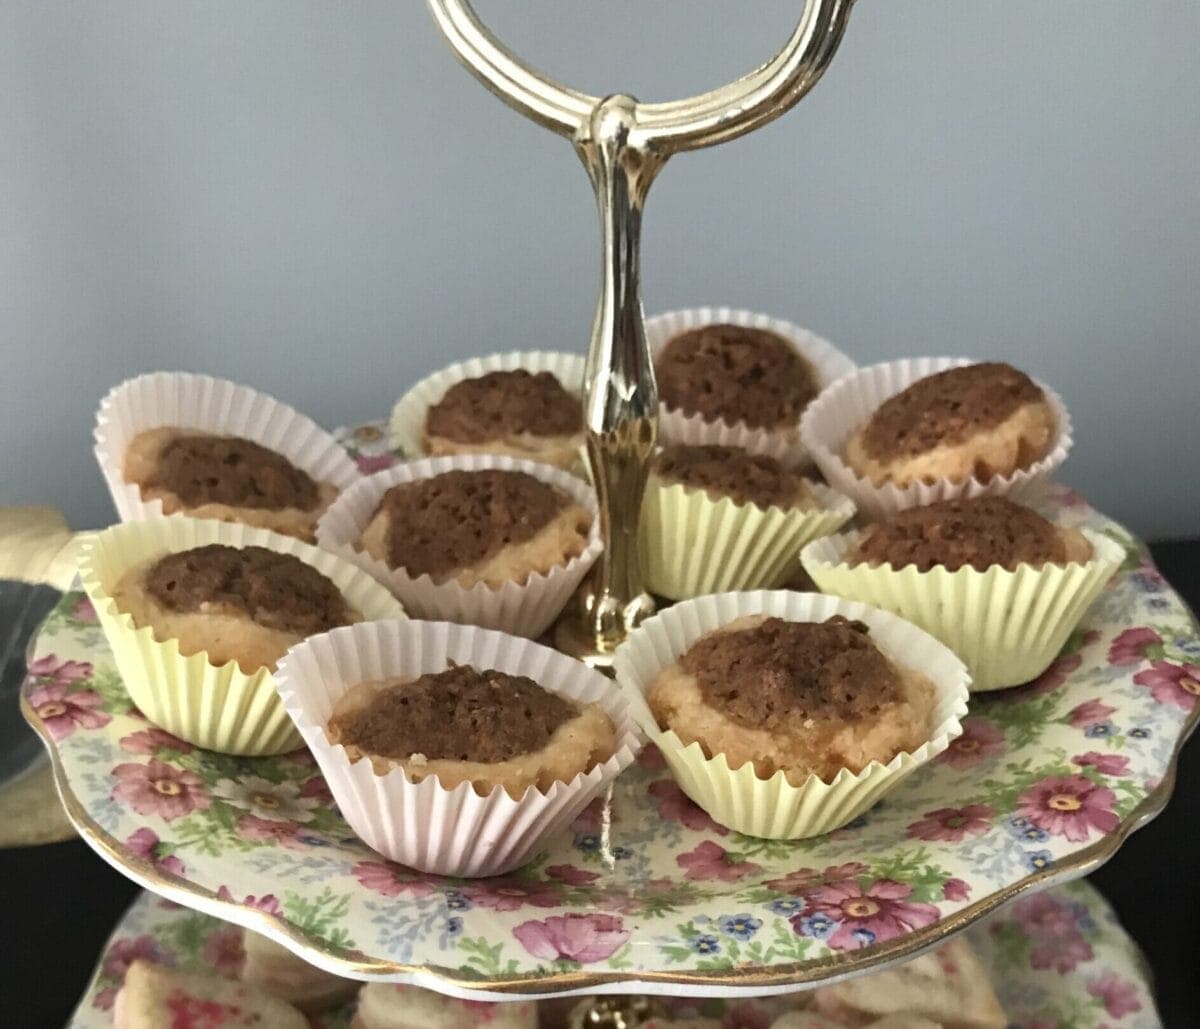 Pecan tassies in a frilly paper cup on a tiered tea plate.